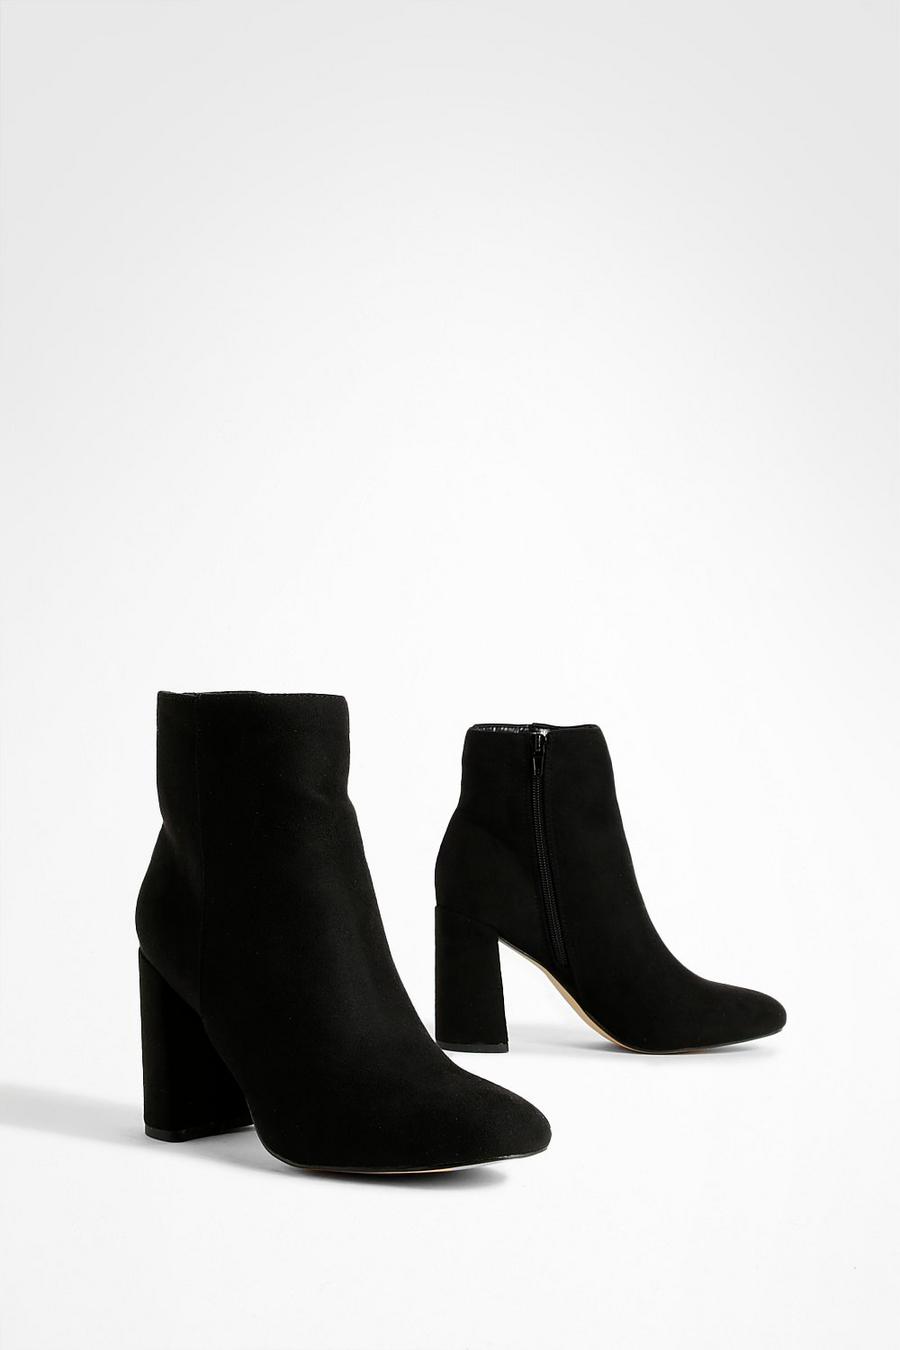 Black Round Toe Block Heel Faux Suede Ankle Boots